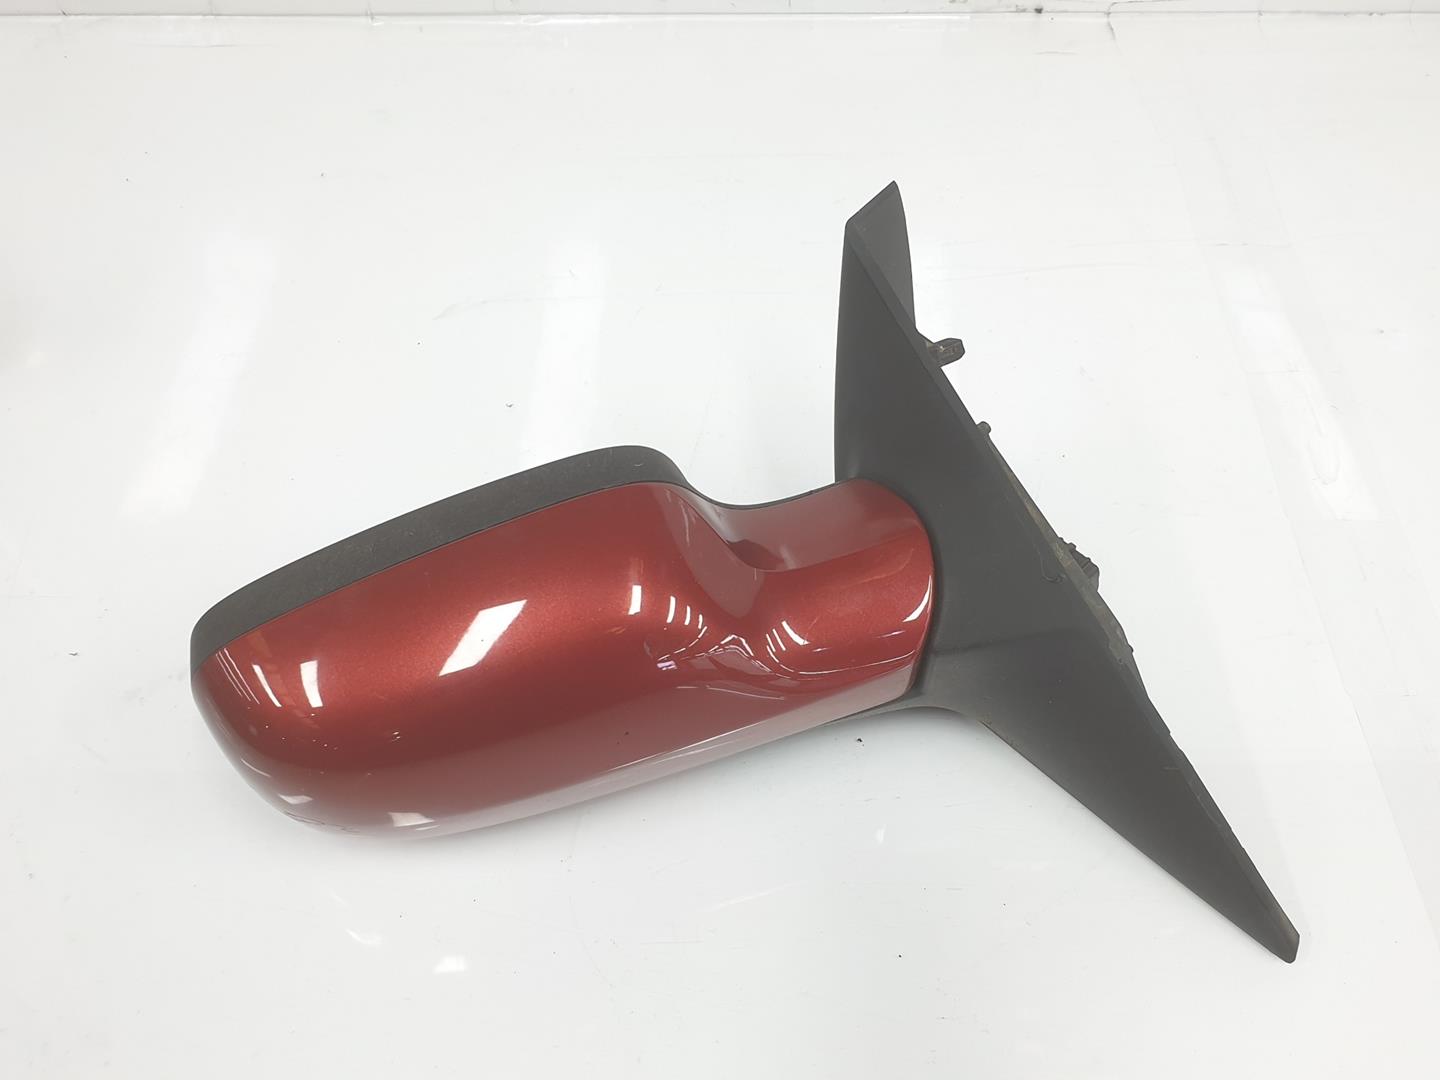 RENAULT Scenic 2 generation (2003-2010) Right Side Wing Mirror 7701055997, 7701068385, COLORROJO 19832766